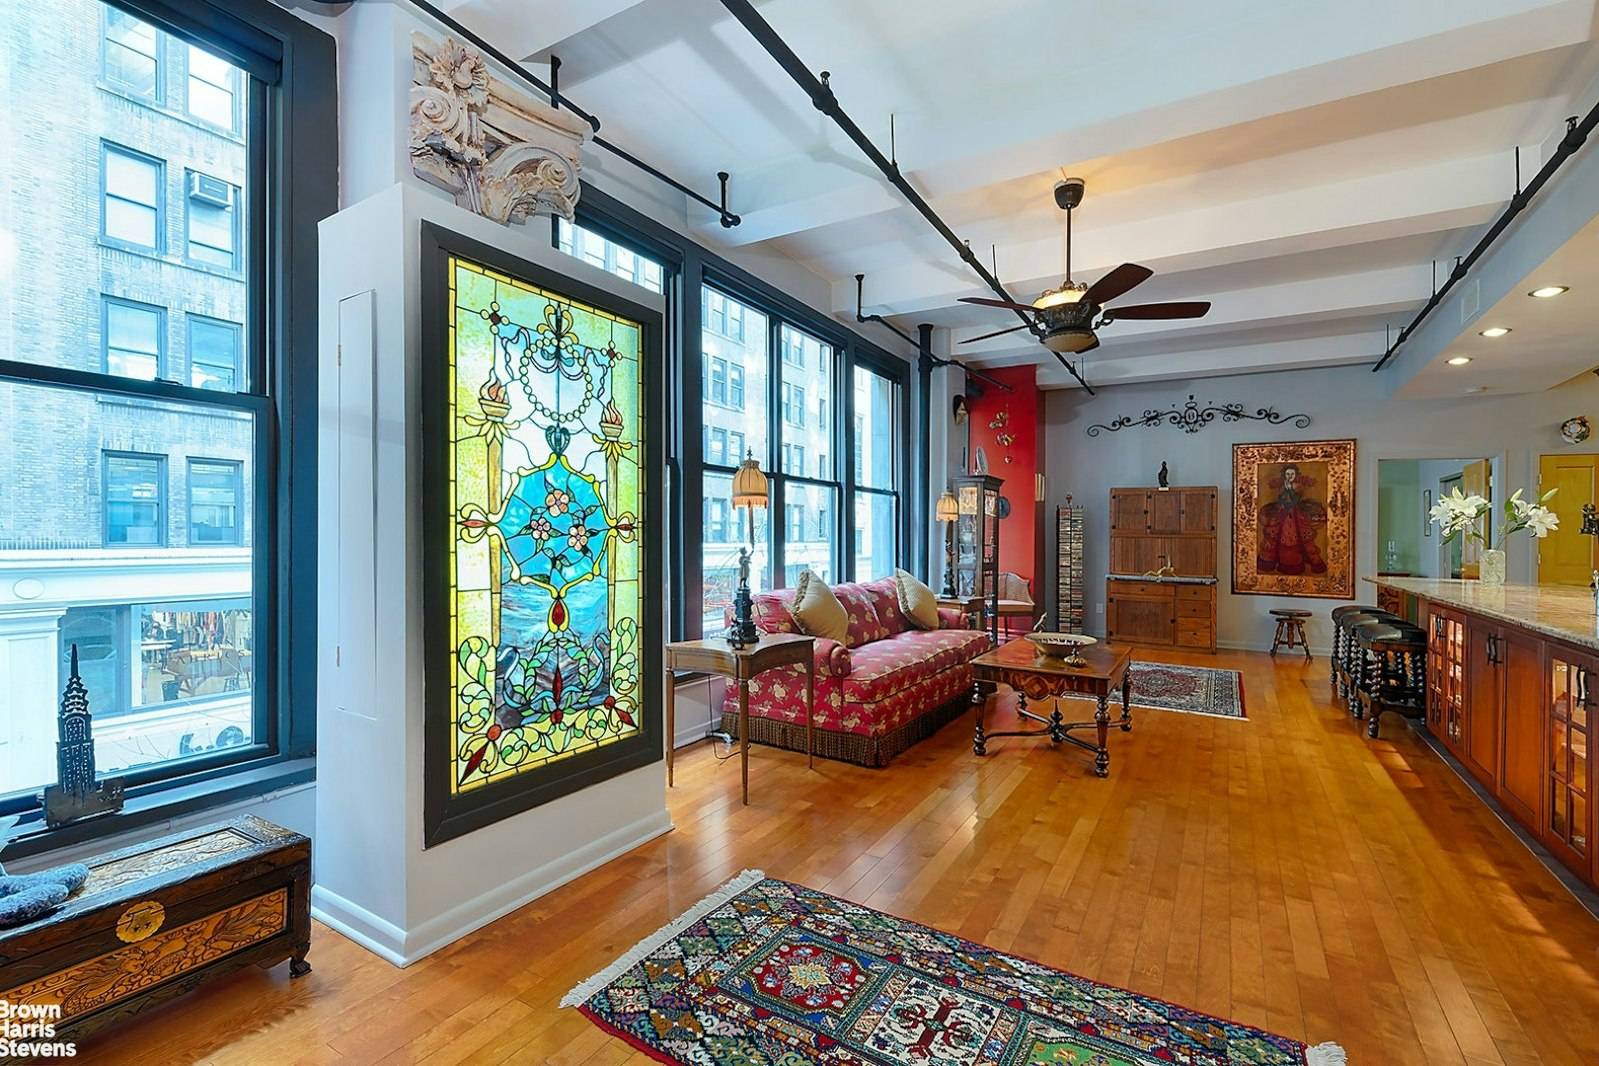 Large and exquisite Pre War loft in a former industrial building, its ceilings are 11 feet high.